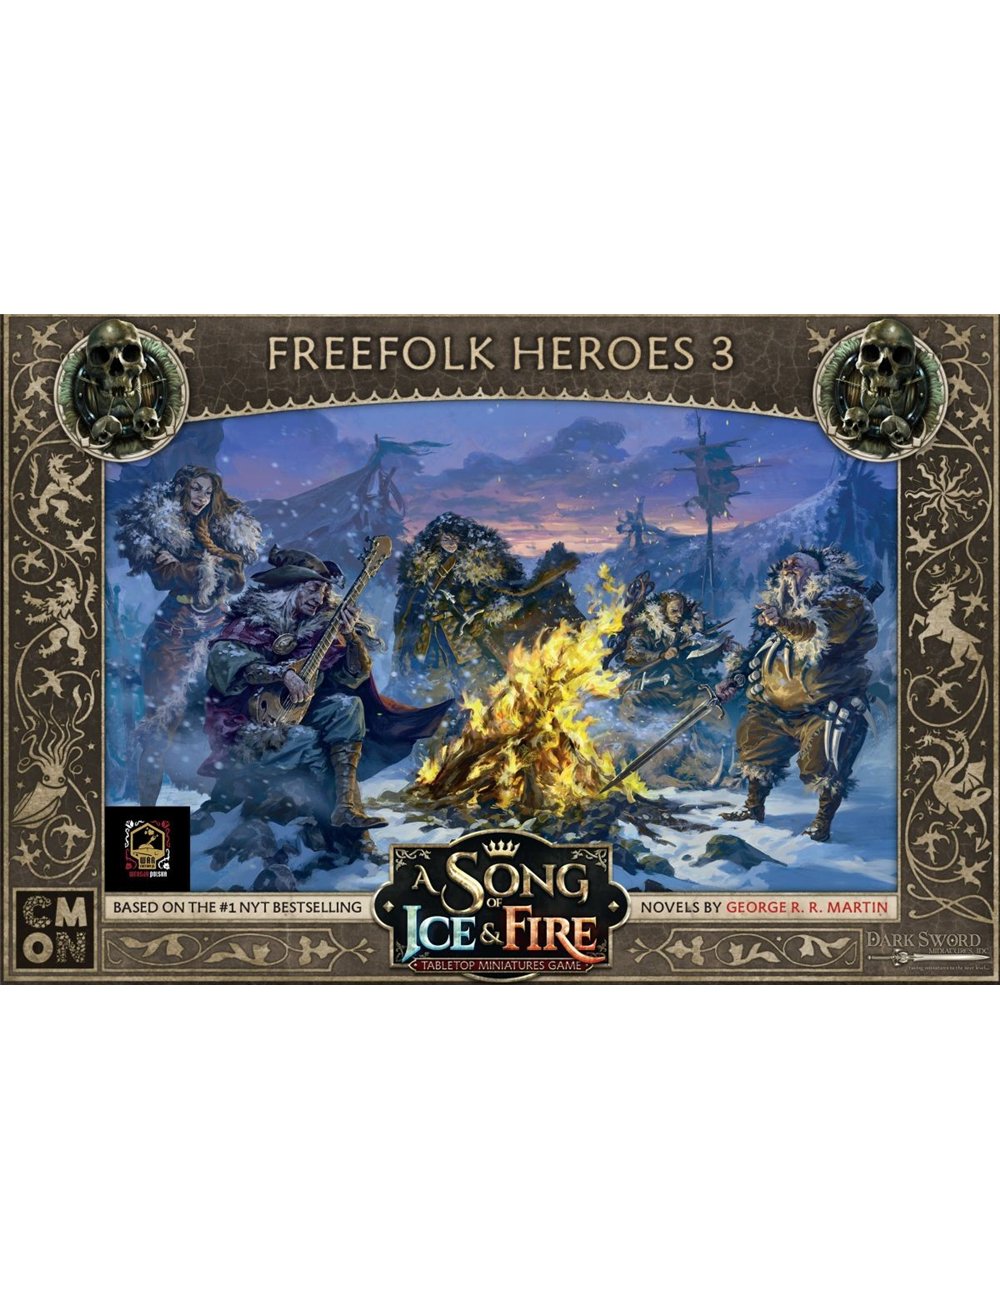 A SONG OF ICE & FIRE - Free Folk Heroes 3 PL